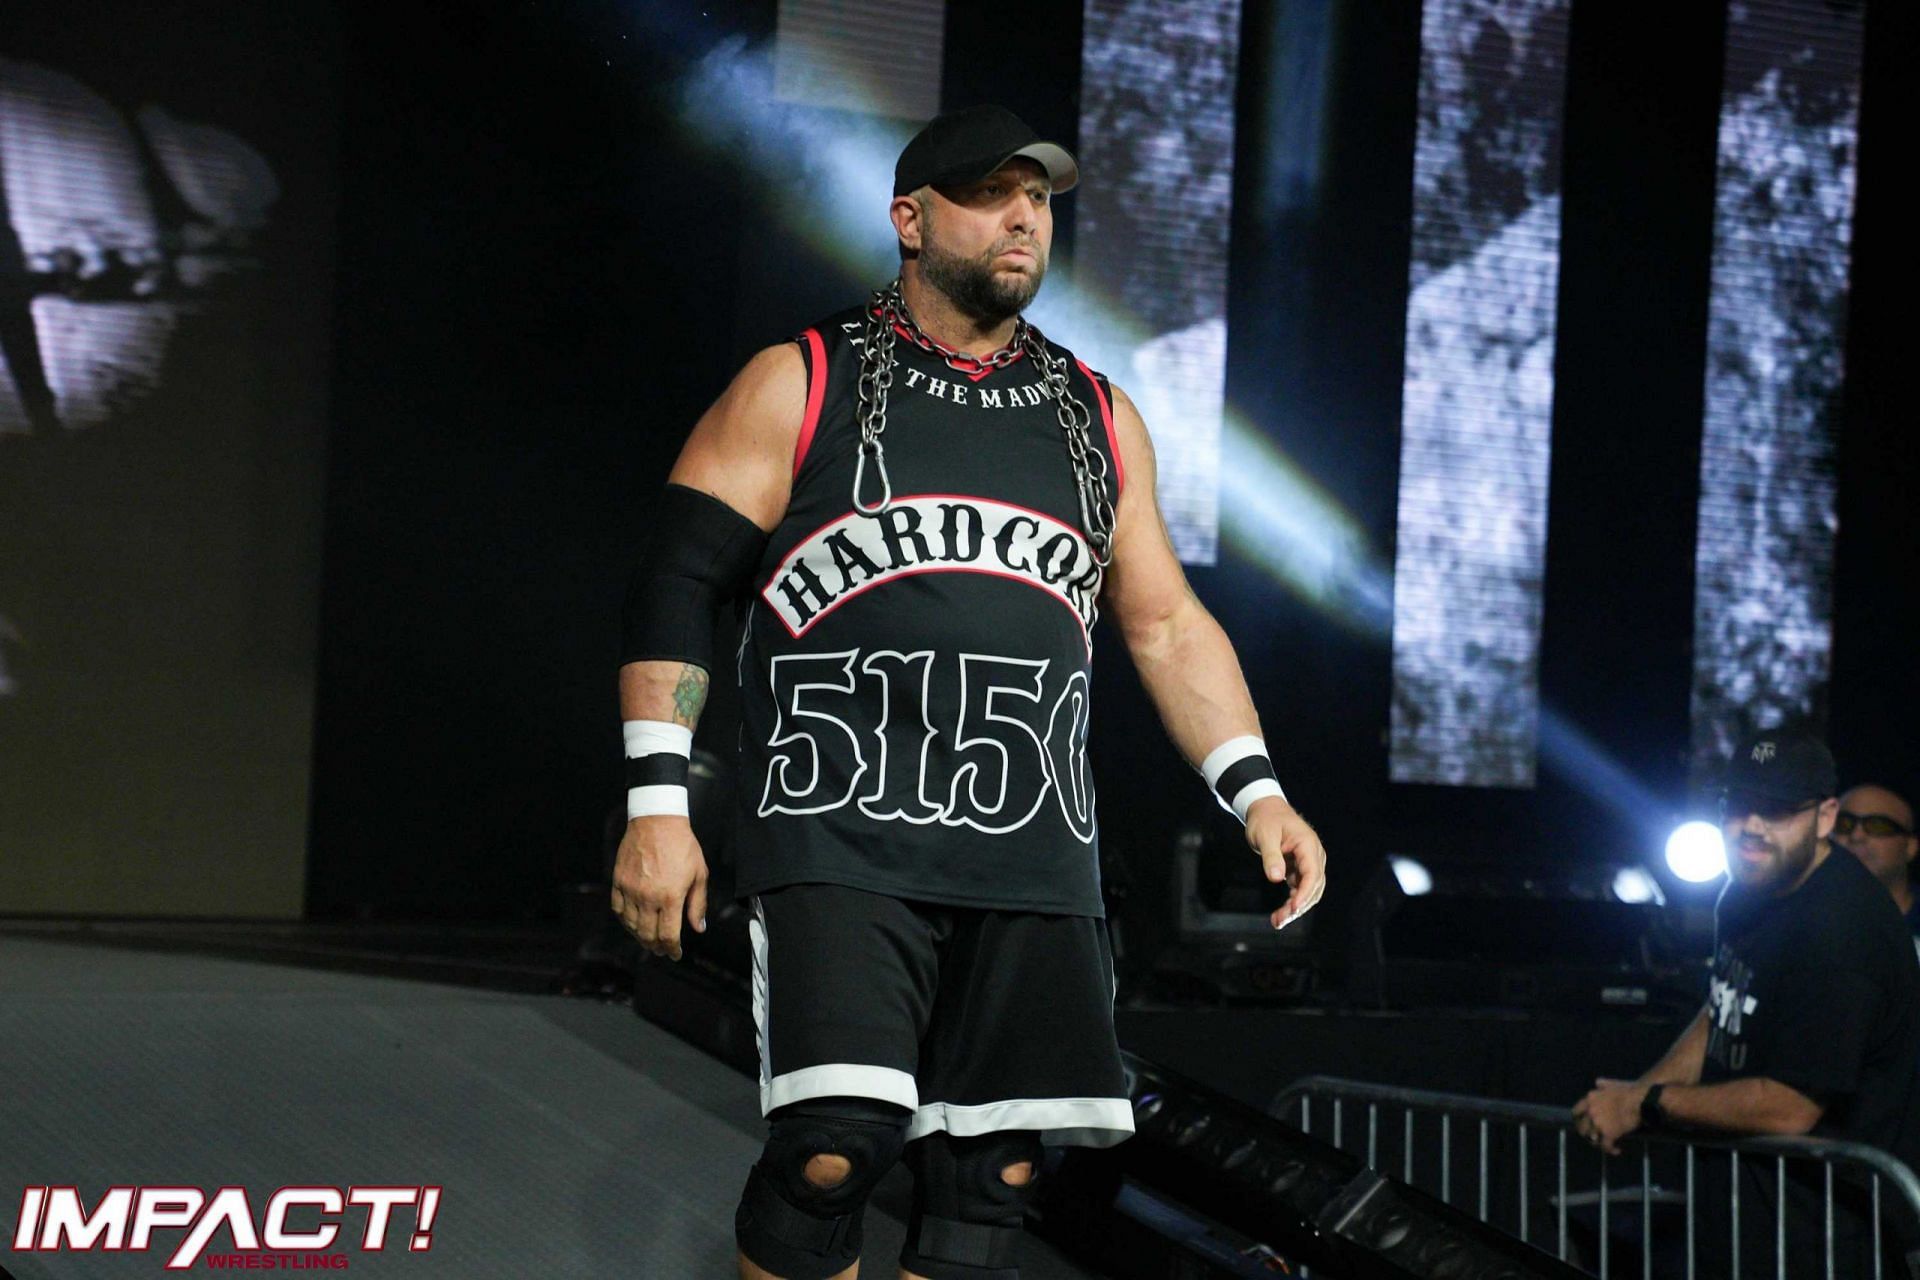 IMPACT and WWE Hall of Famer Bully Ray.